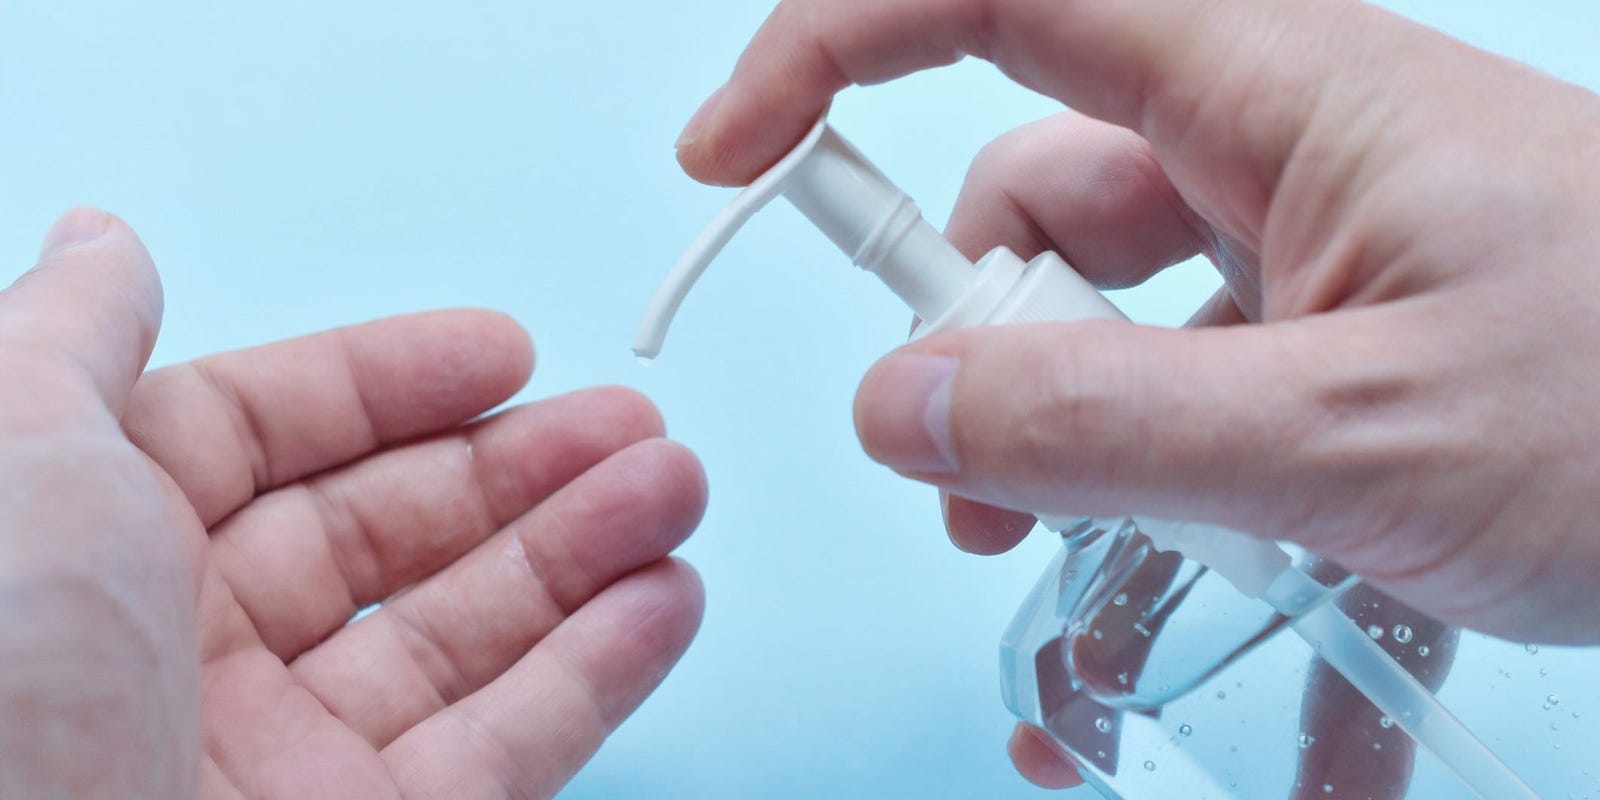 Protect Yourself From Coronavirus With This DIY Hand Sanitizer